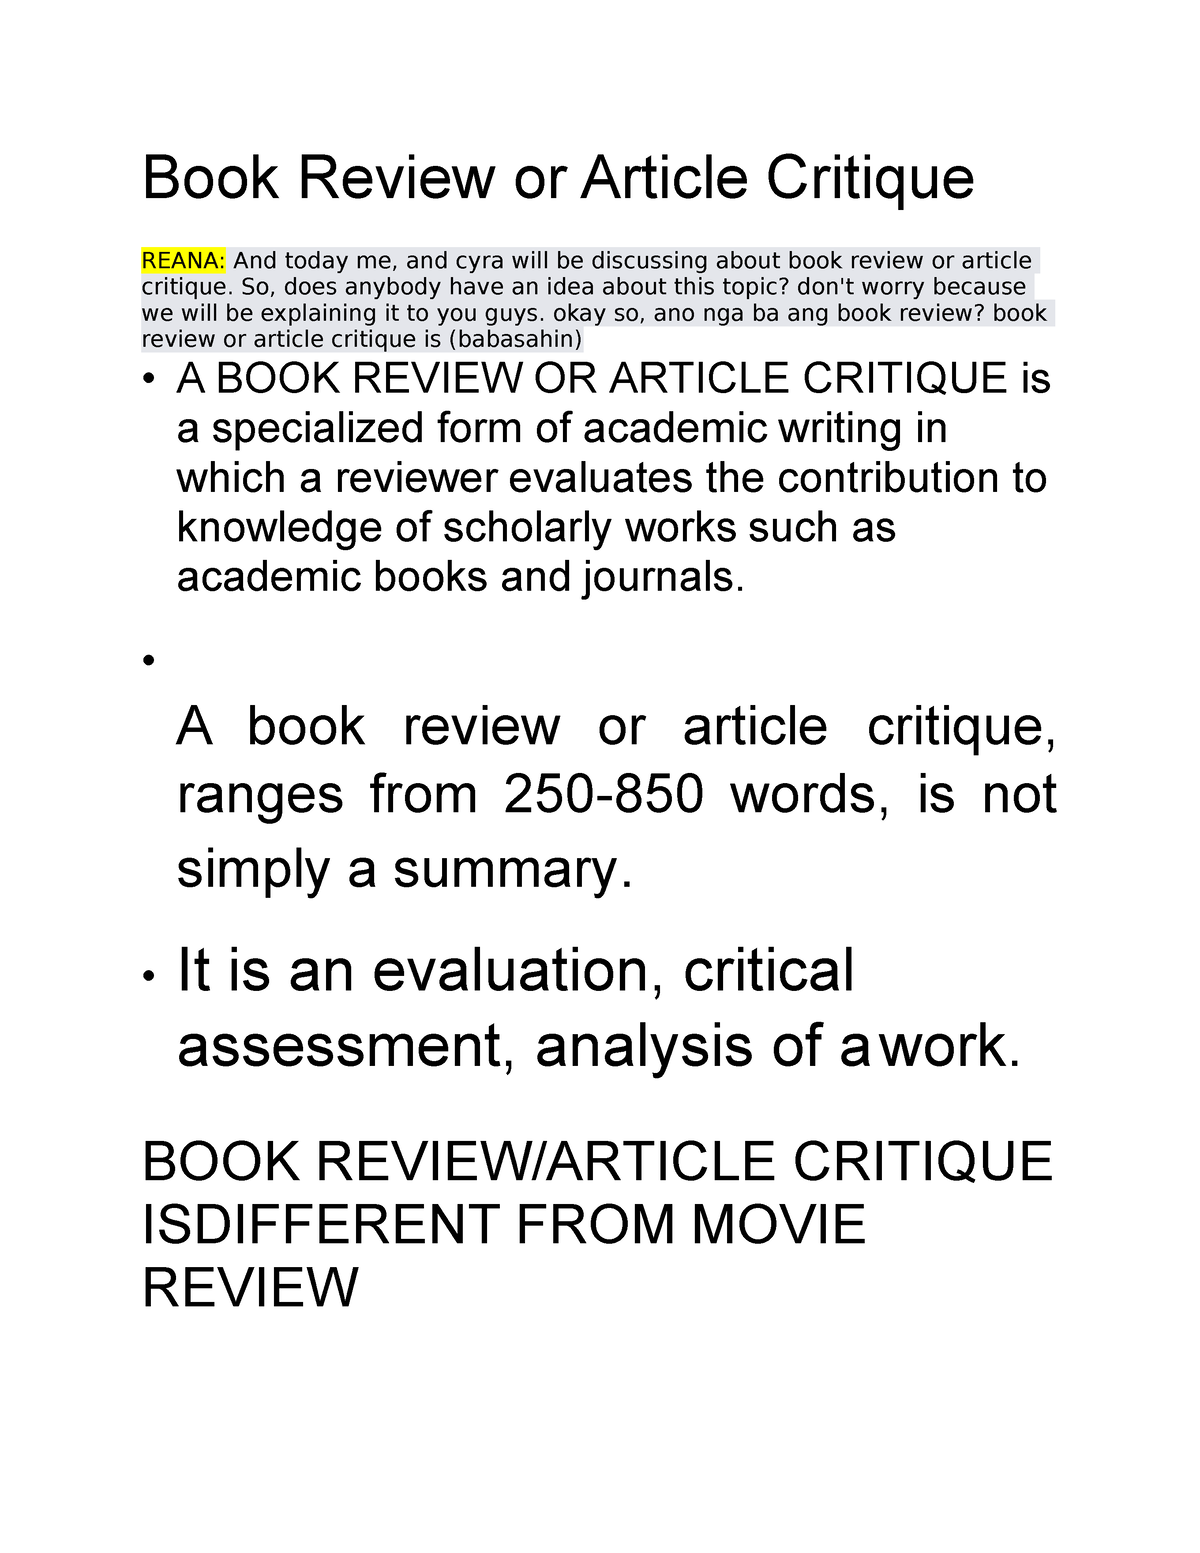 the book review or article critique